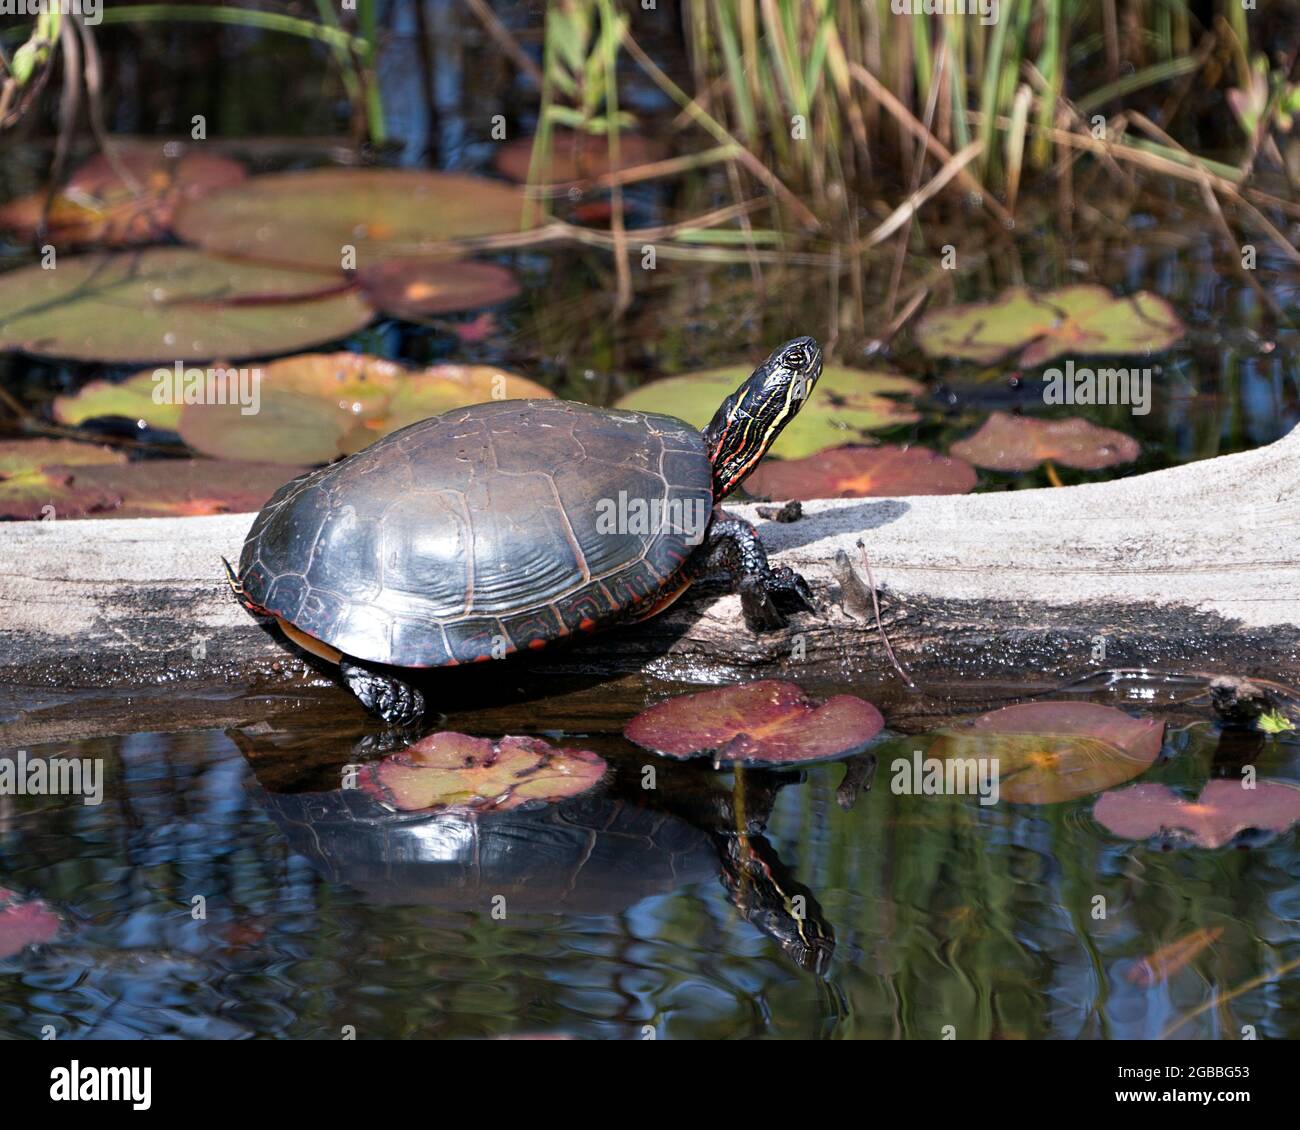 Painted turtle on a log in the pond with lily pad pond, water lilies, and displaying its turtle shell, head, paws in its habitat. Turtle Image. Photo. Stock Photo